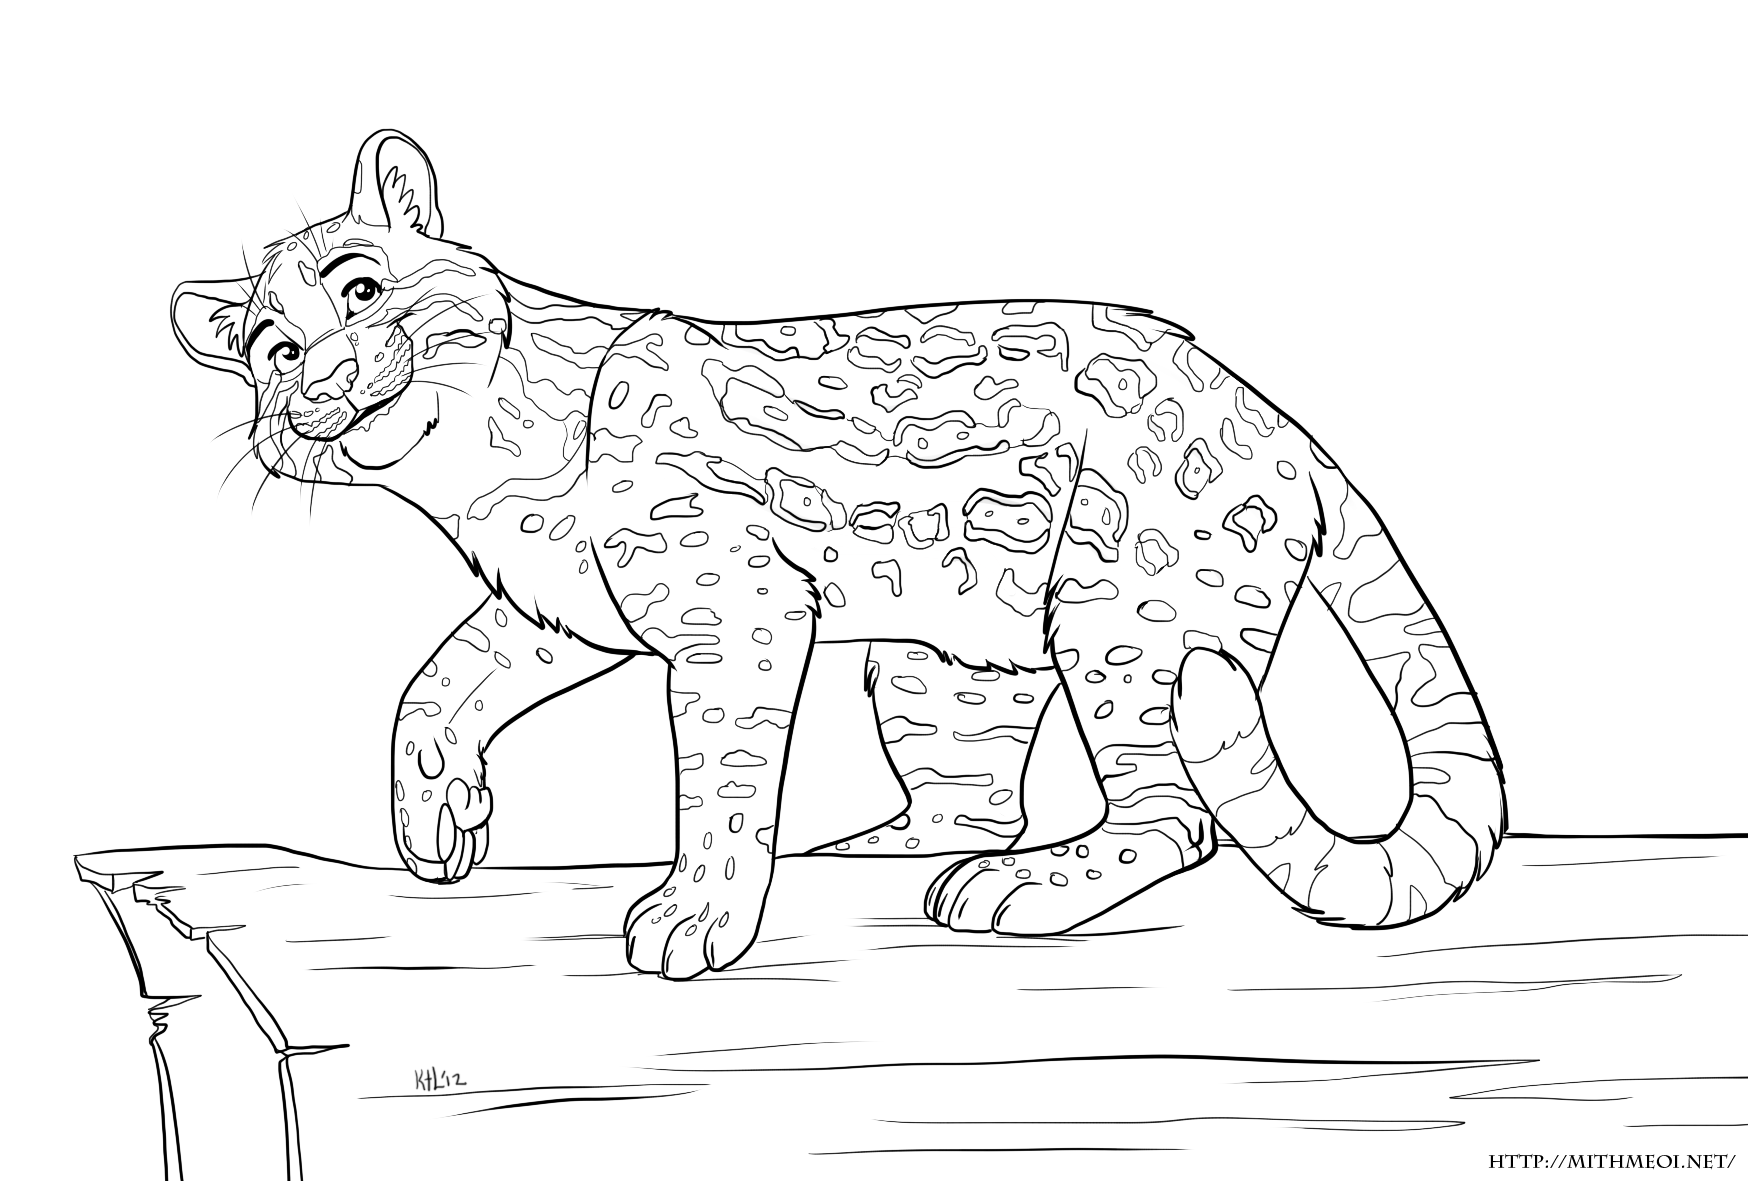 Ocelot Coloring Sheets Coloring Pages